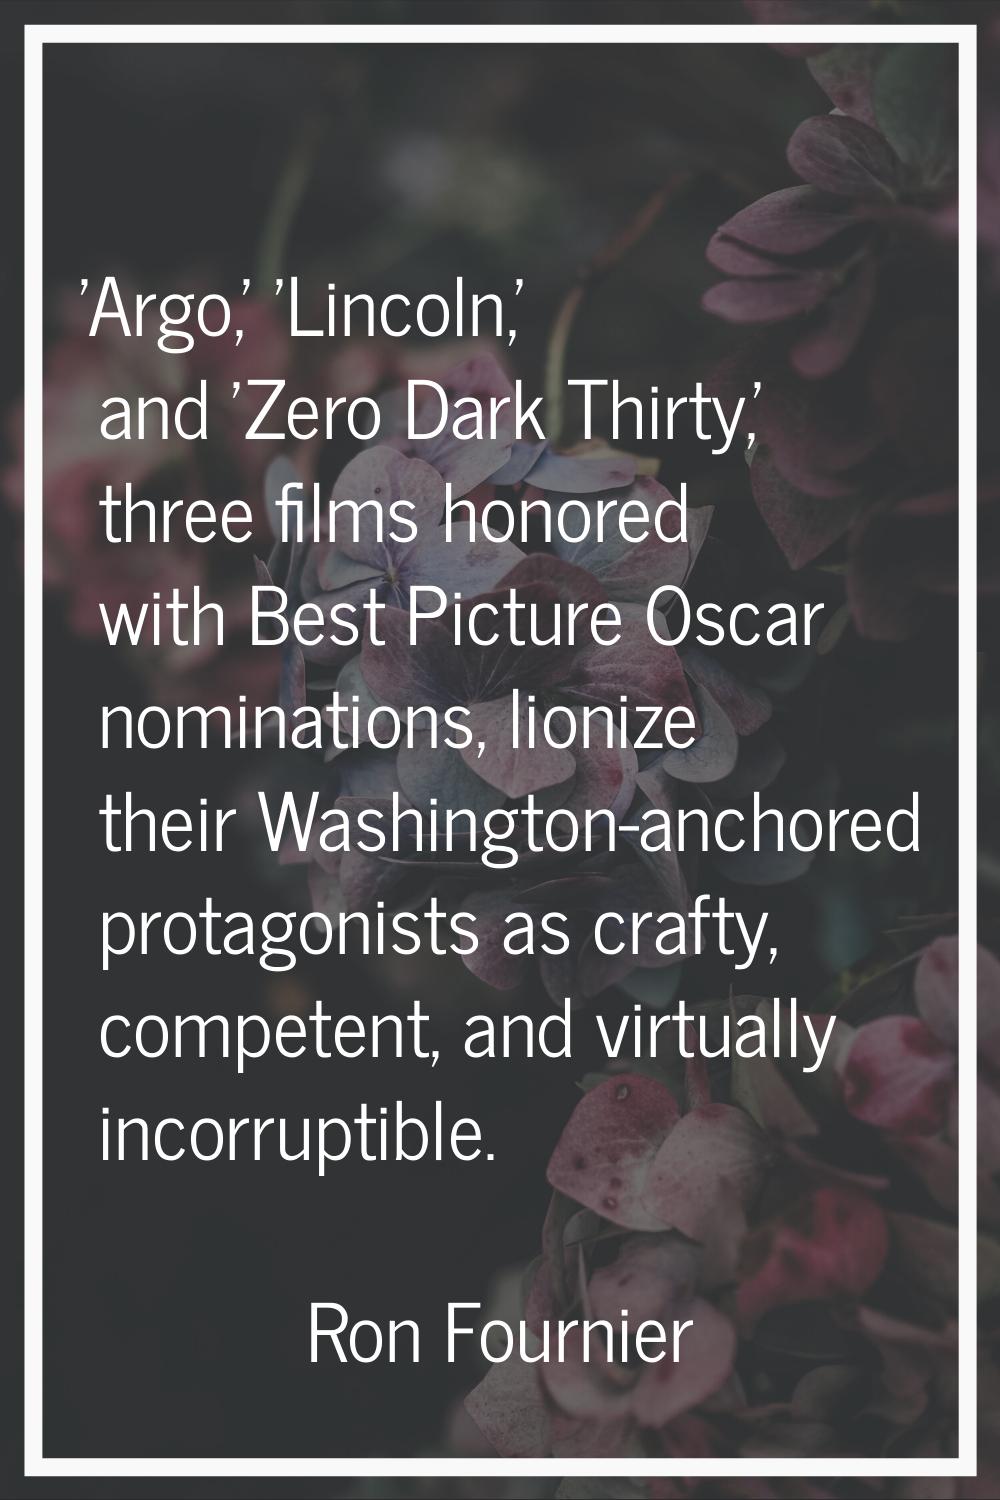 'Argo,' 'Lincoln,' and 'Zero Dark Thirty,' three films honored with Best Picture Oscar nominations,